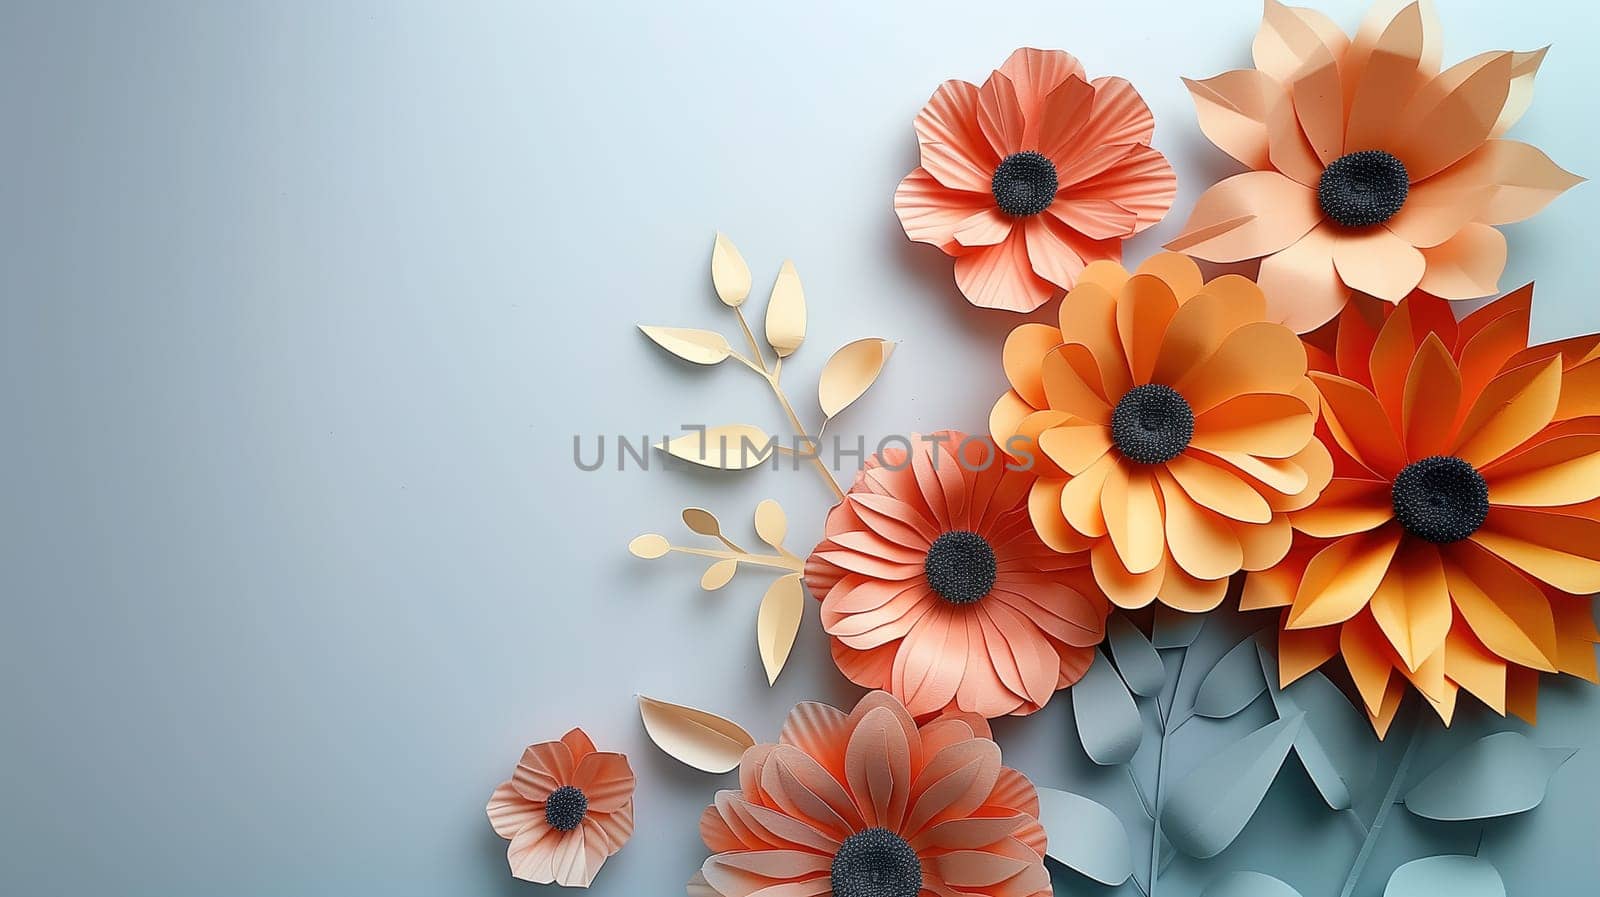 A collection of paper flowers in various colors and sizes is arranged neatly on a vibrant blue background. The flowers create a cheerful and colorful display, adding a touch of decoration to the space.